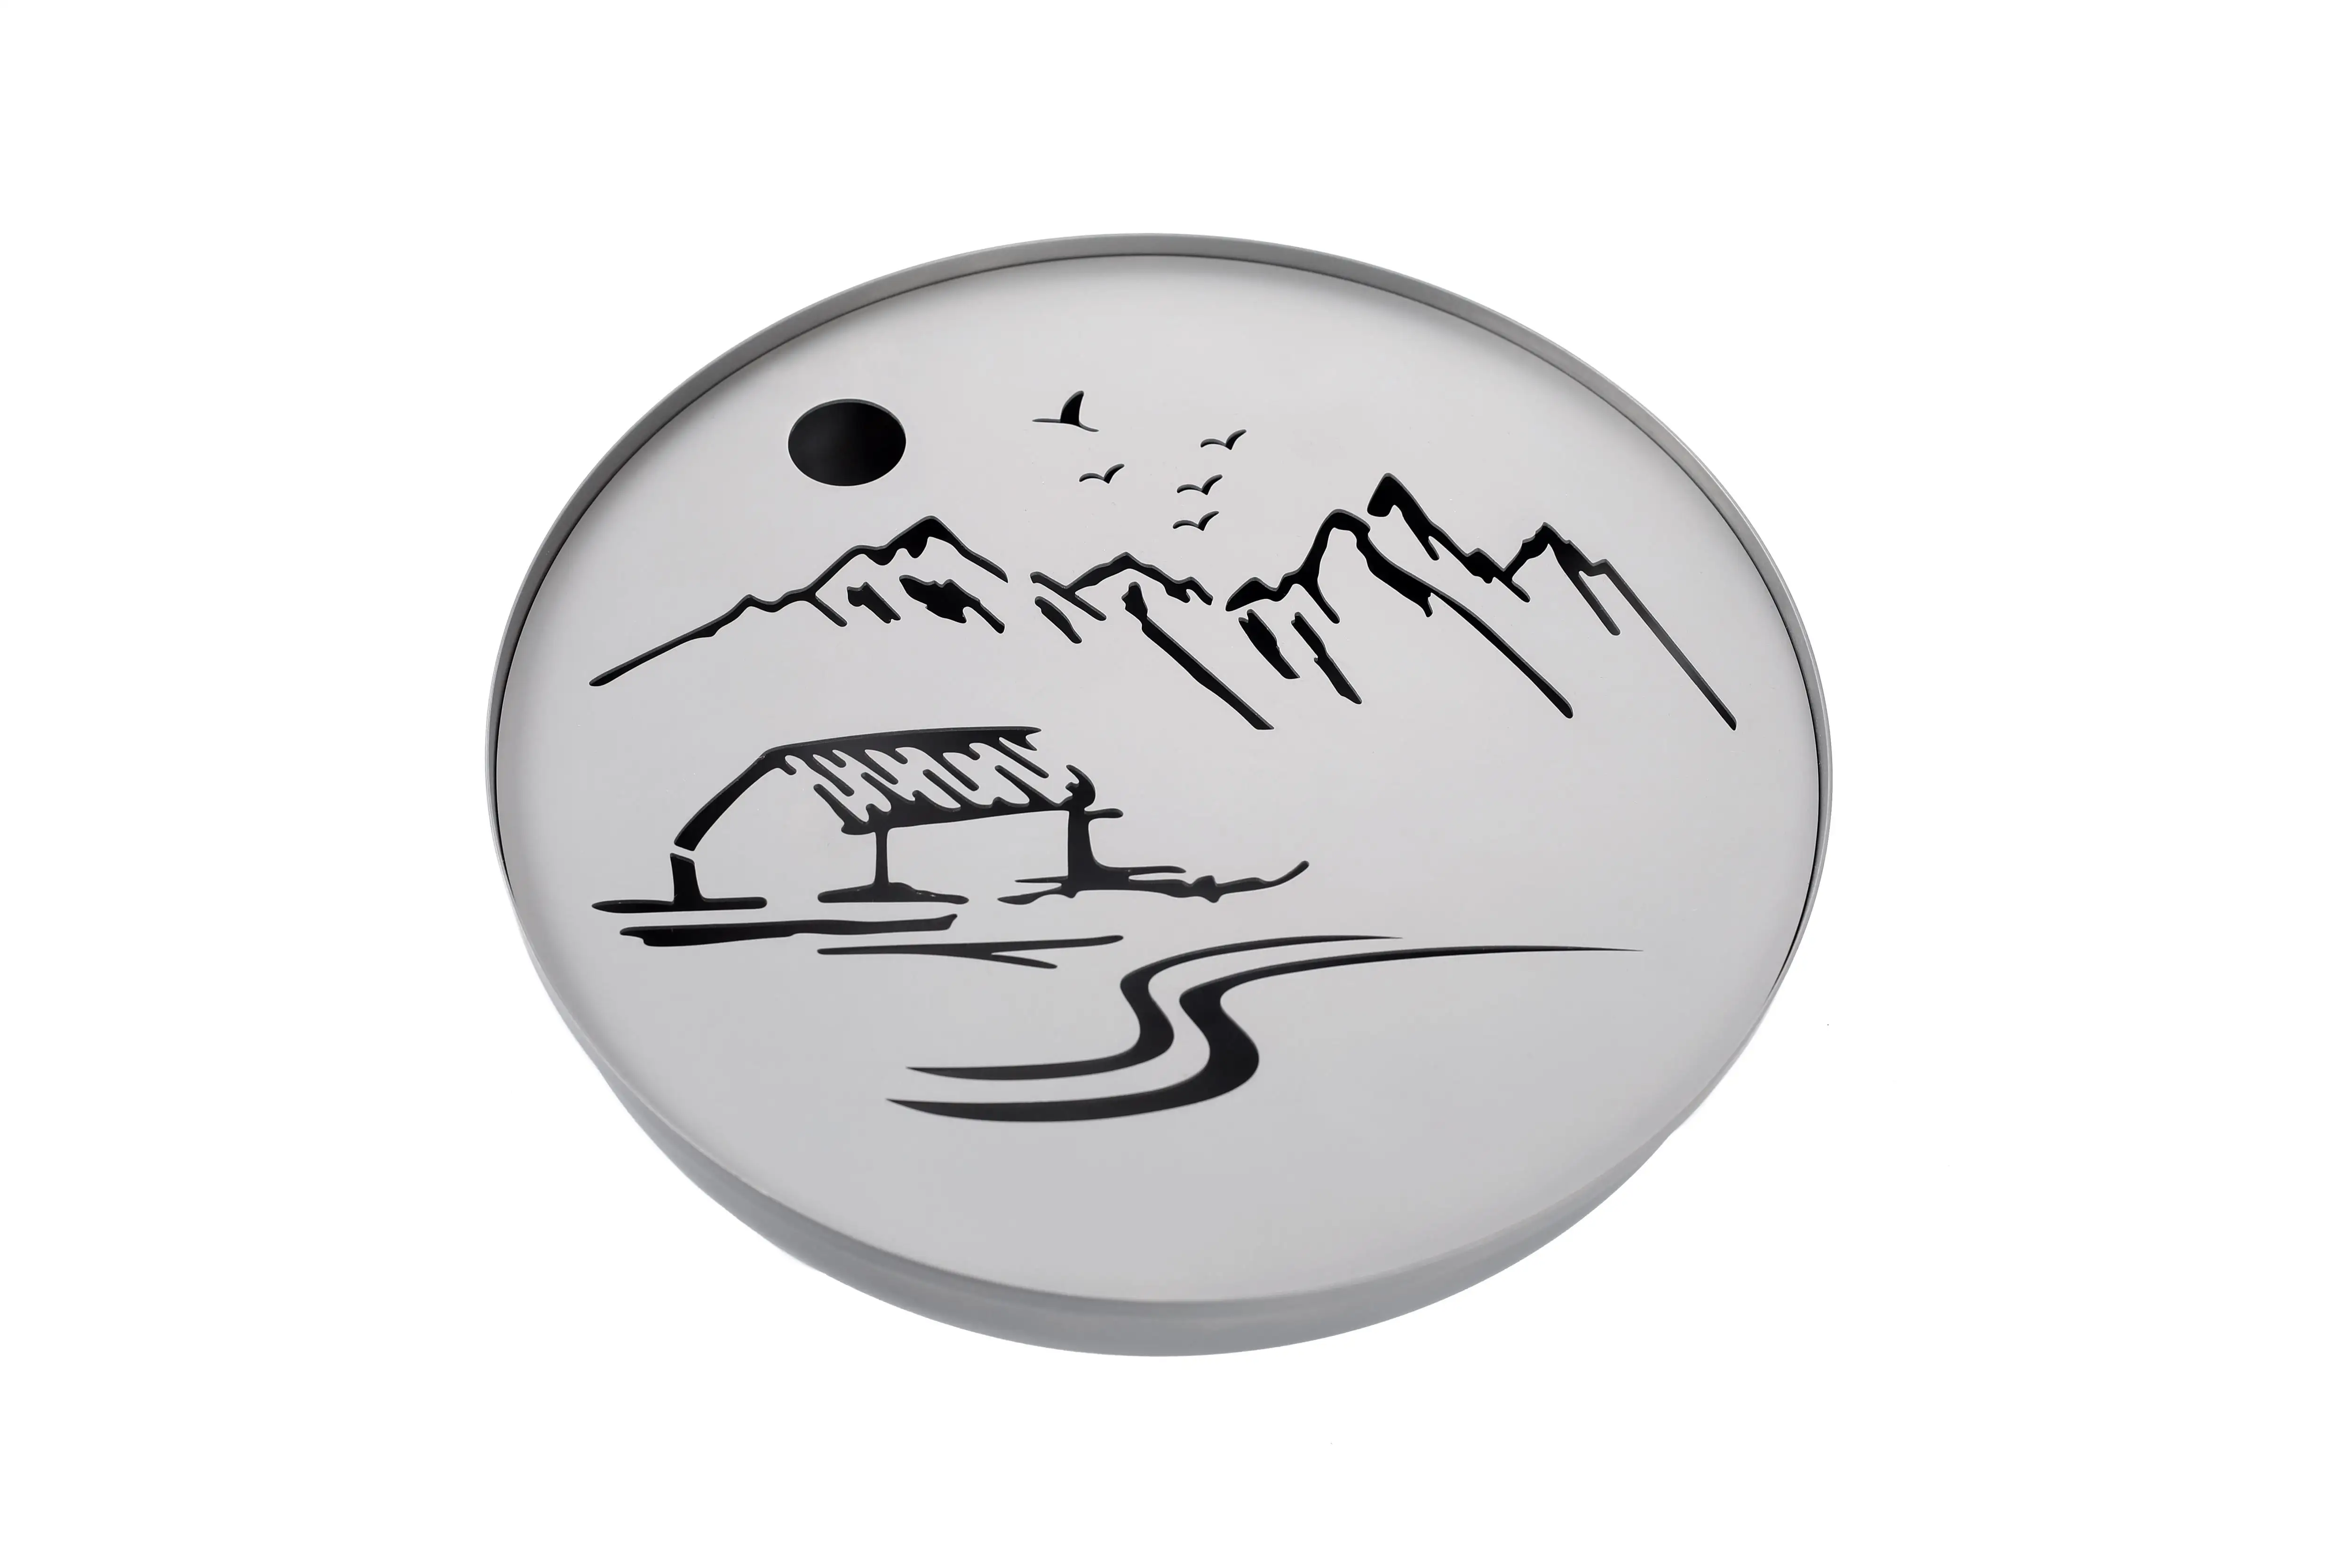 Landscape Painting Tea Sets Titanium Tea Tray Travel Home Office Cups Tea Coffee Container